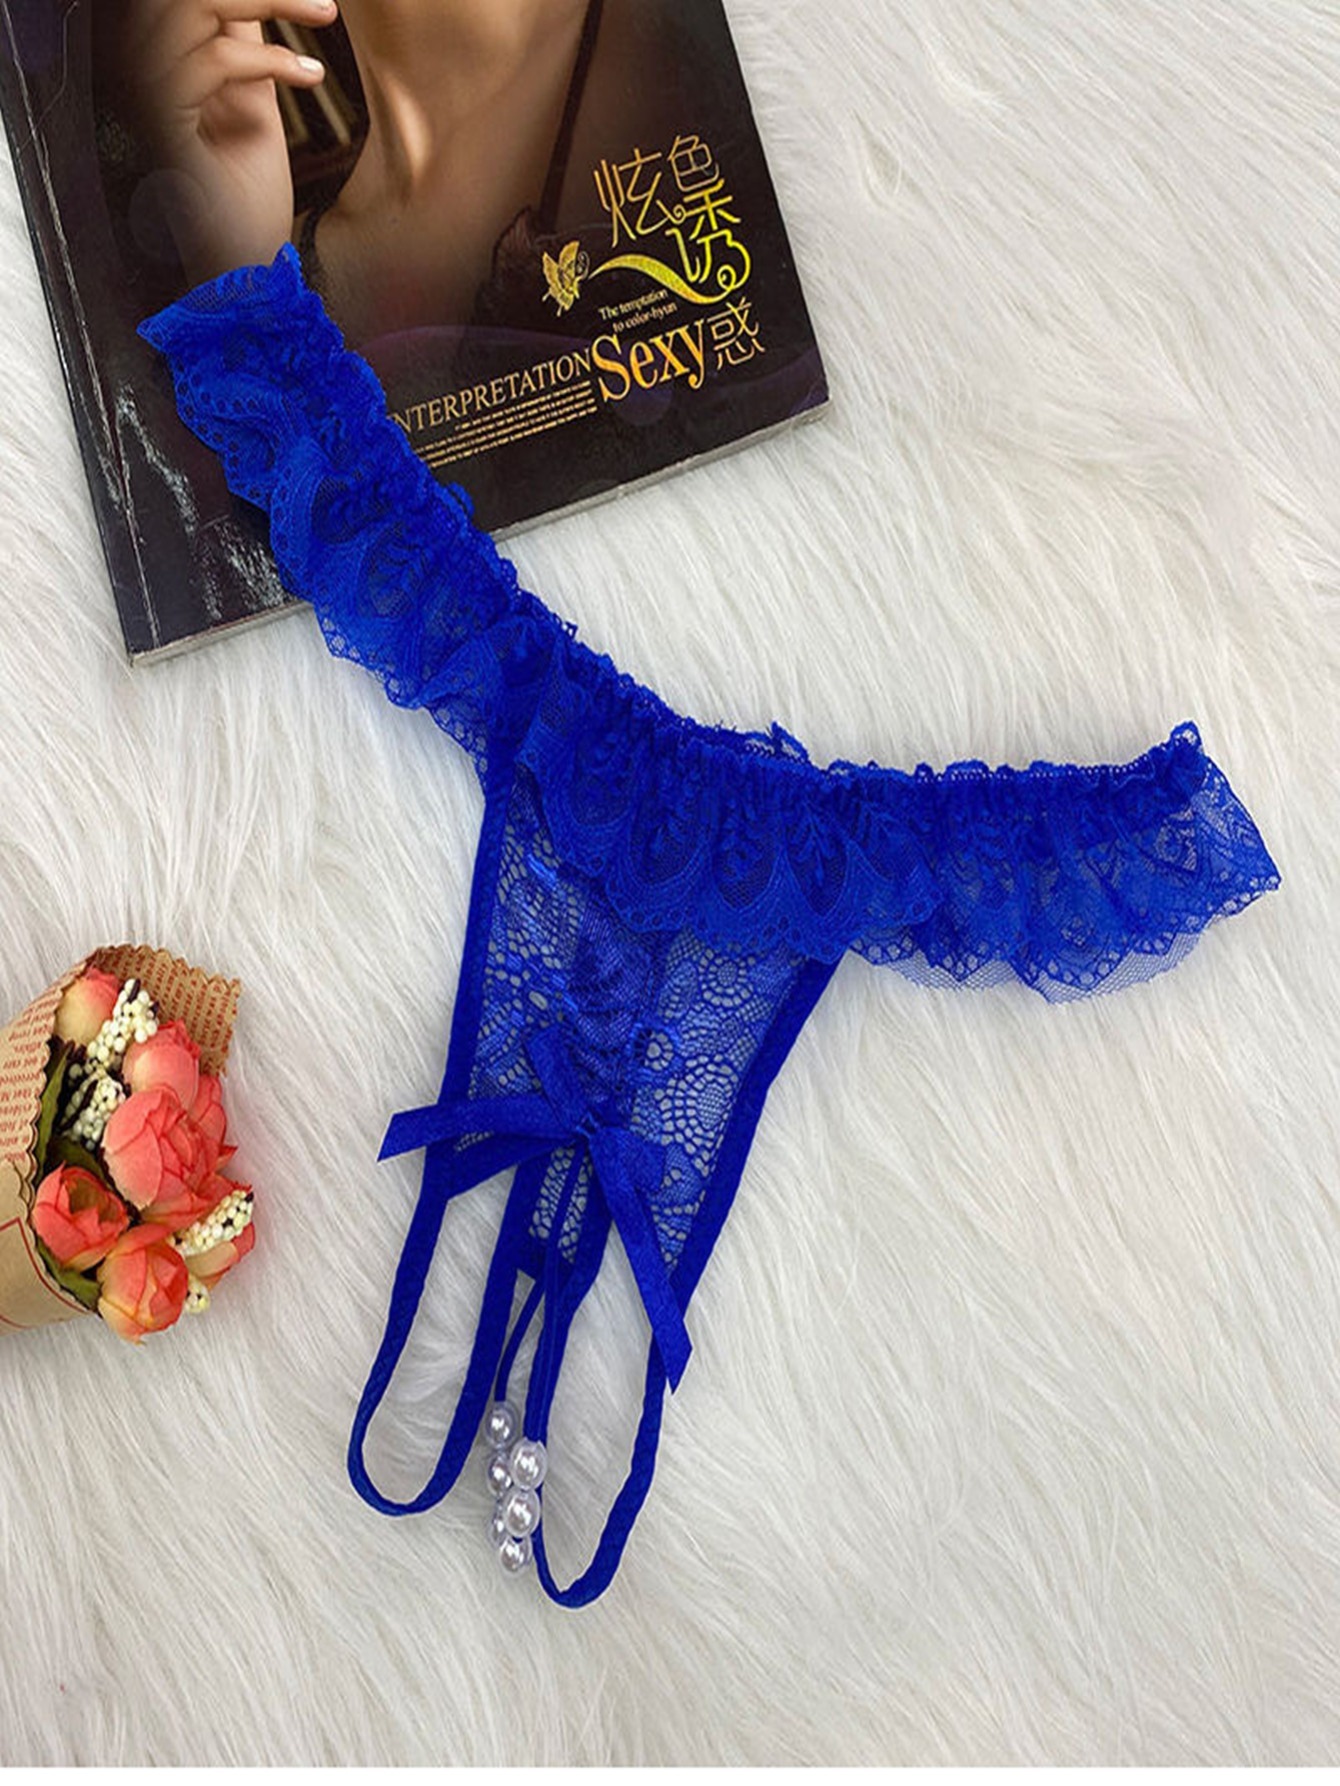 Pearl Lace G-string Crotchless Underwear Open Crotch Sexy Thongs